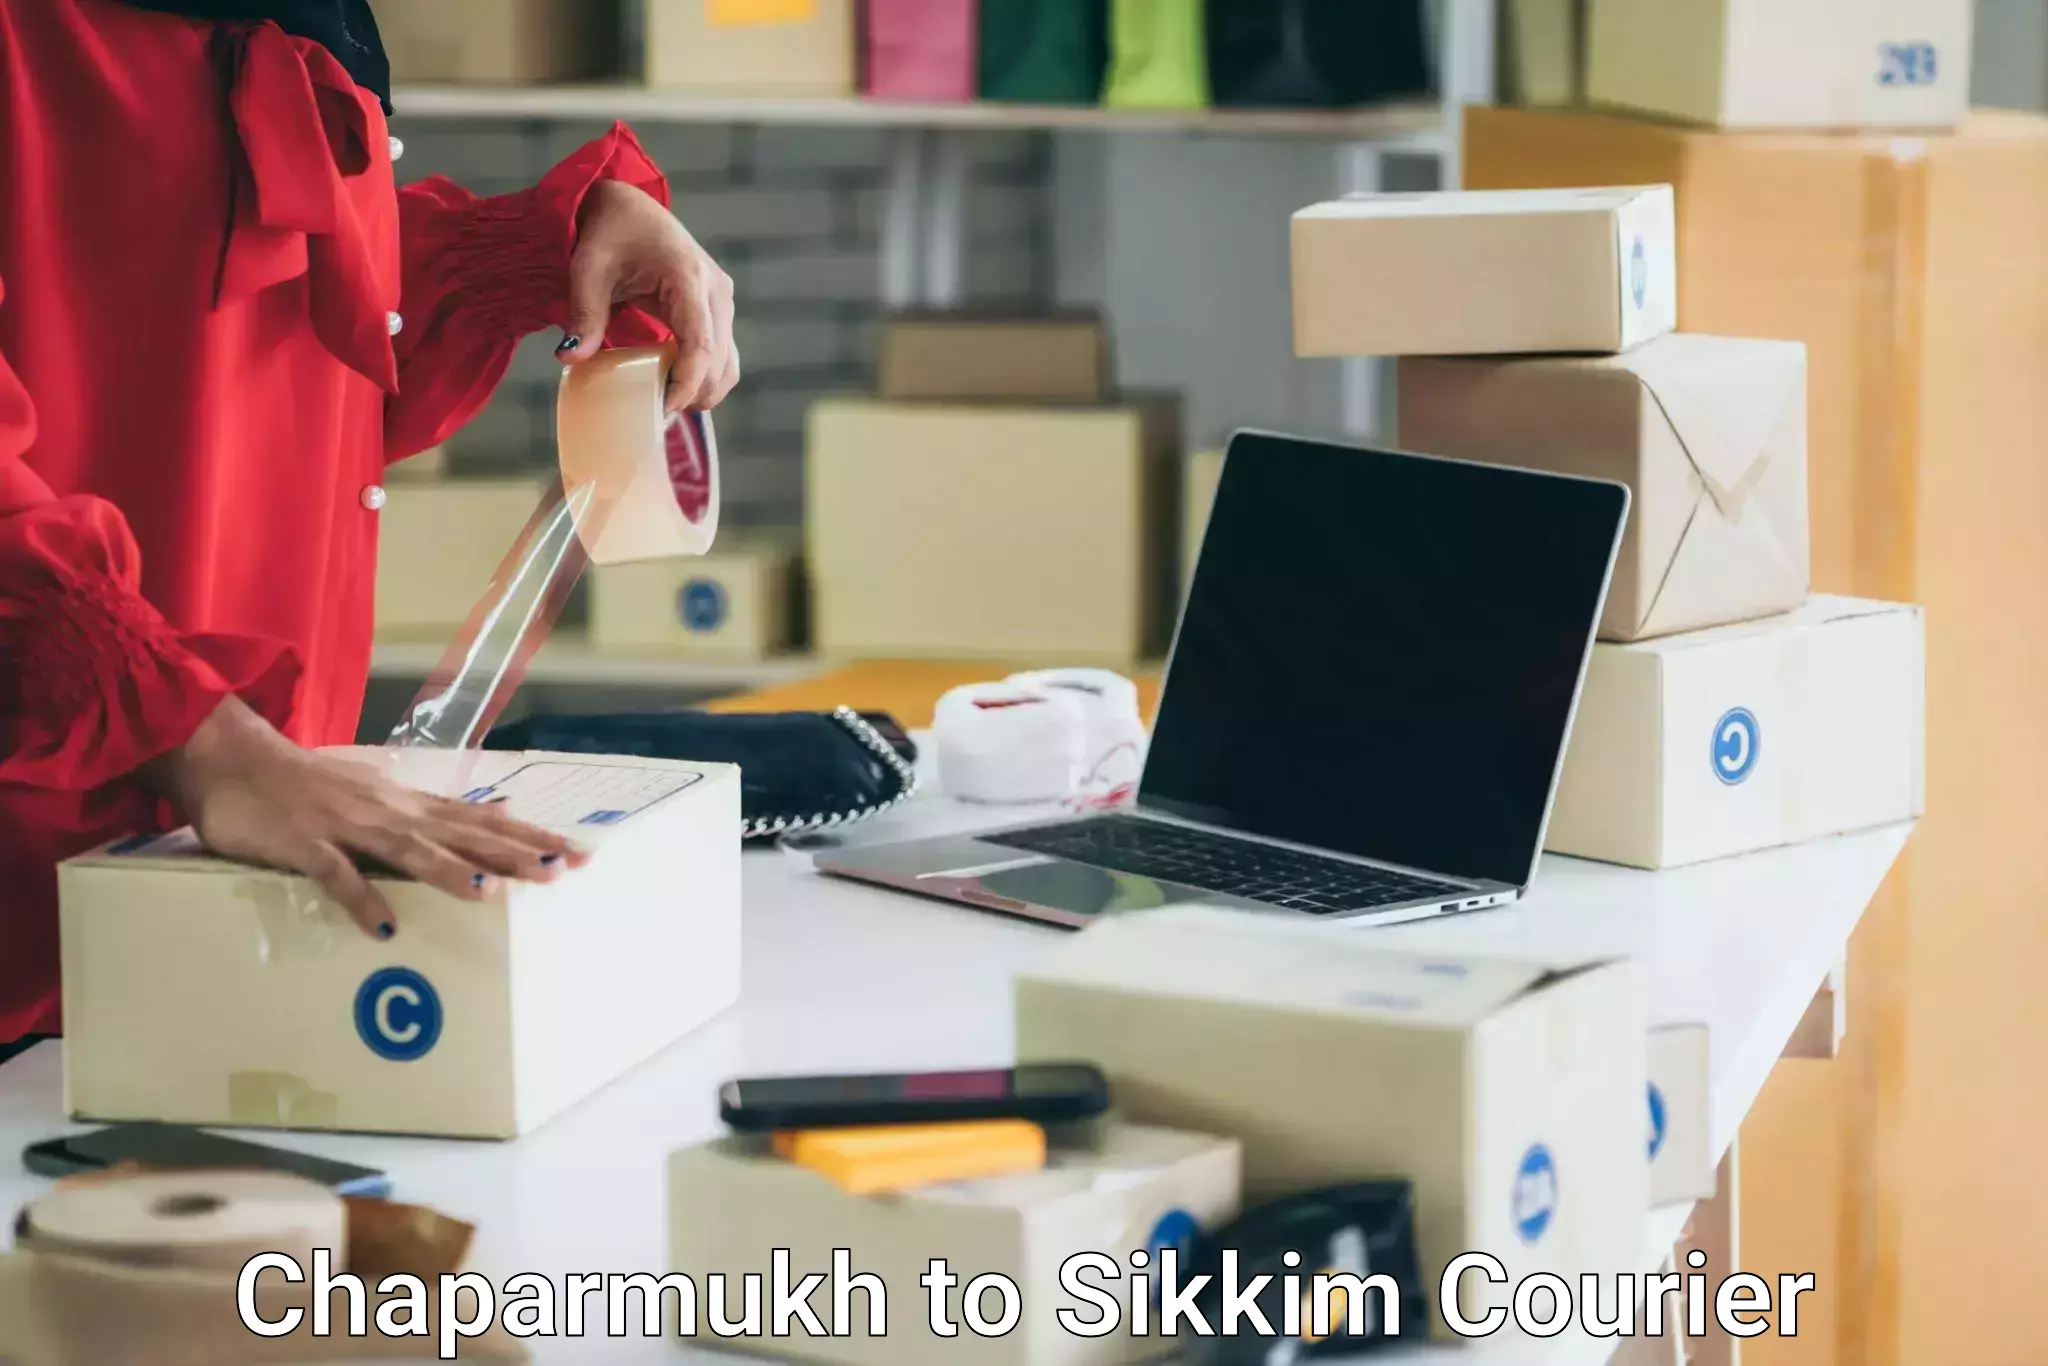 Home moving experts Chaparmukh to Sikkim